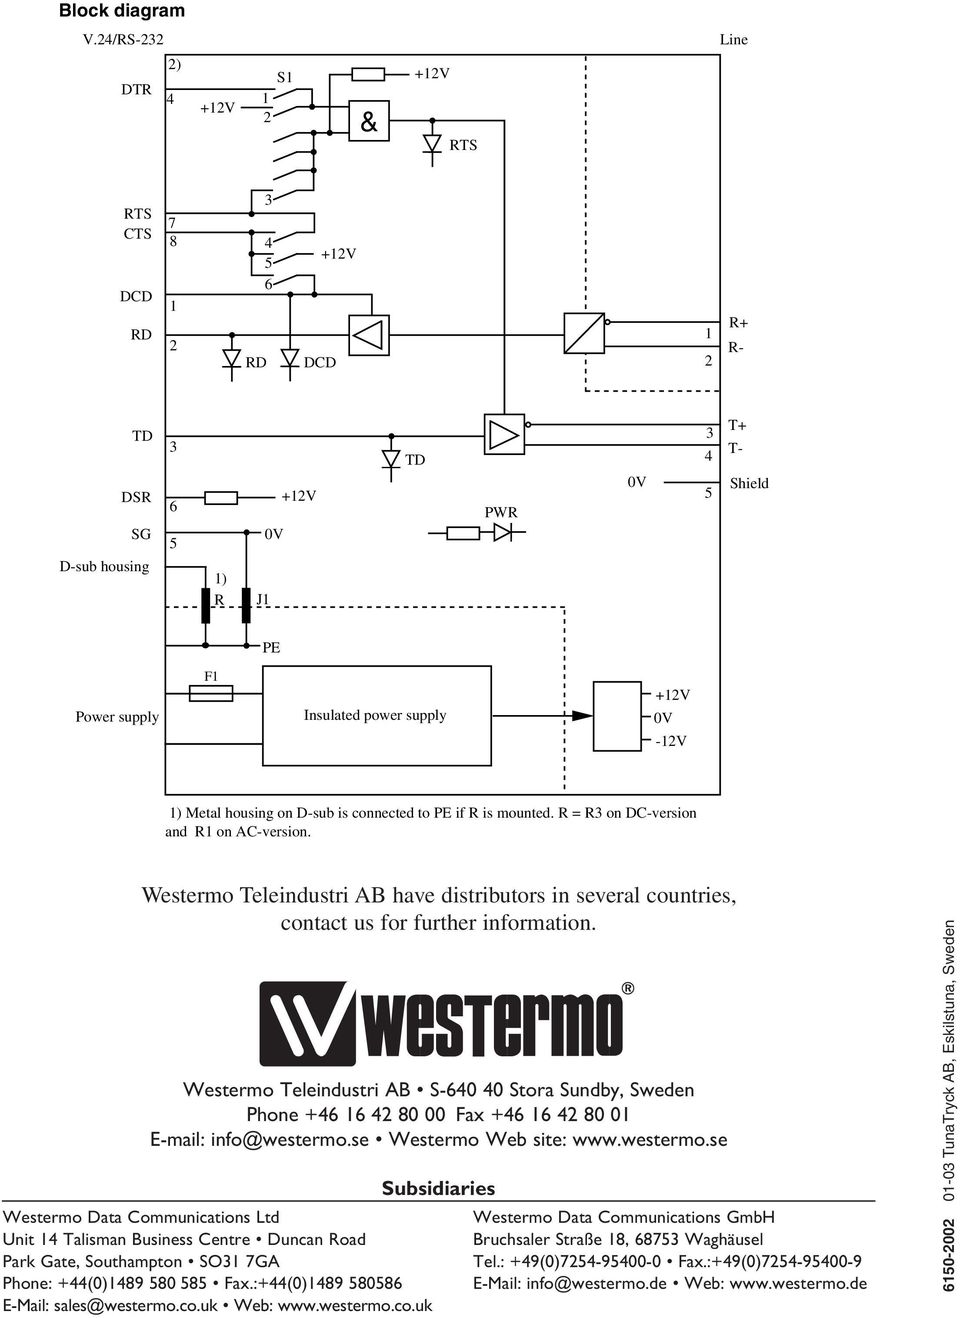 housing on D-sub is connected to PE if R is mounted. R = R on DC-version and R on AC-version. Westermo Teleindustri AB have distributors in several countries, contact us for further information.